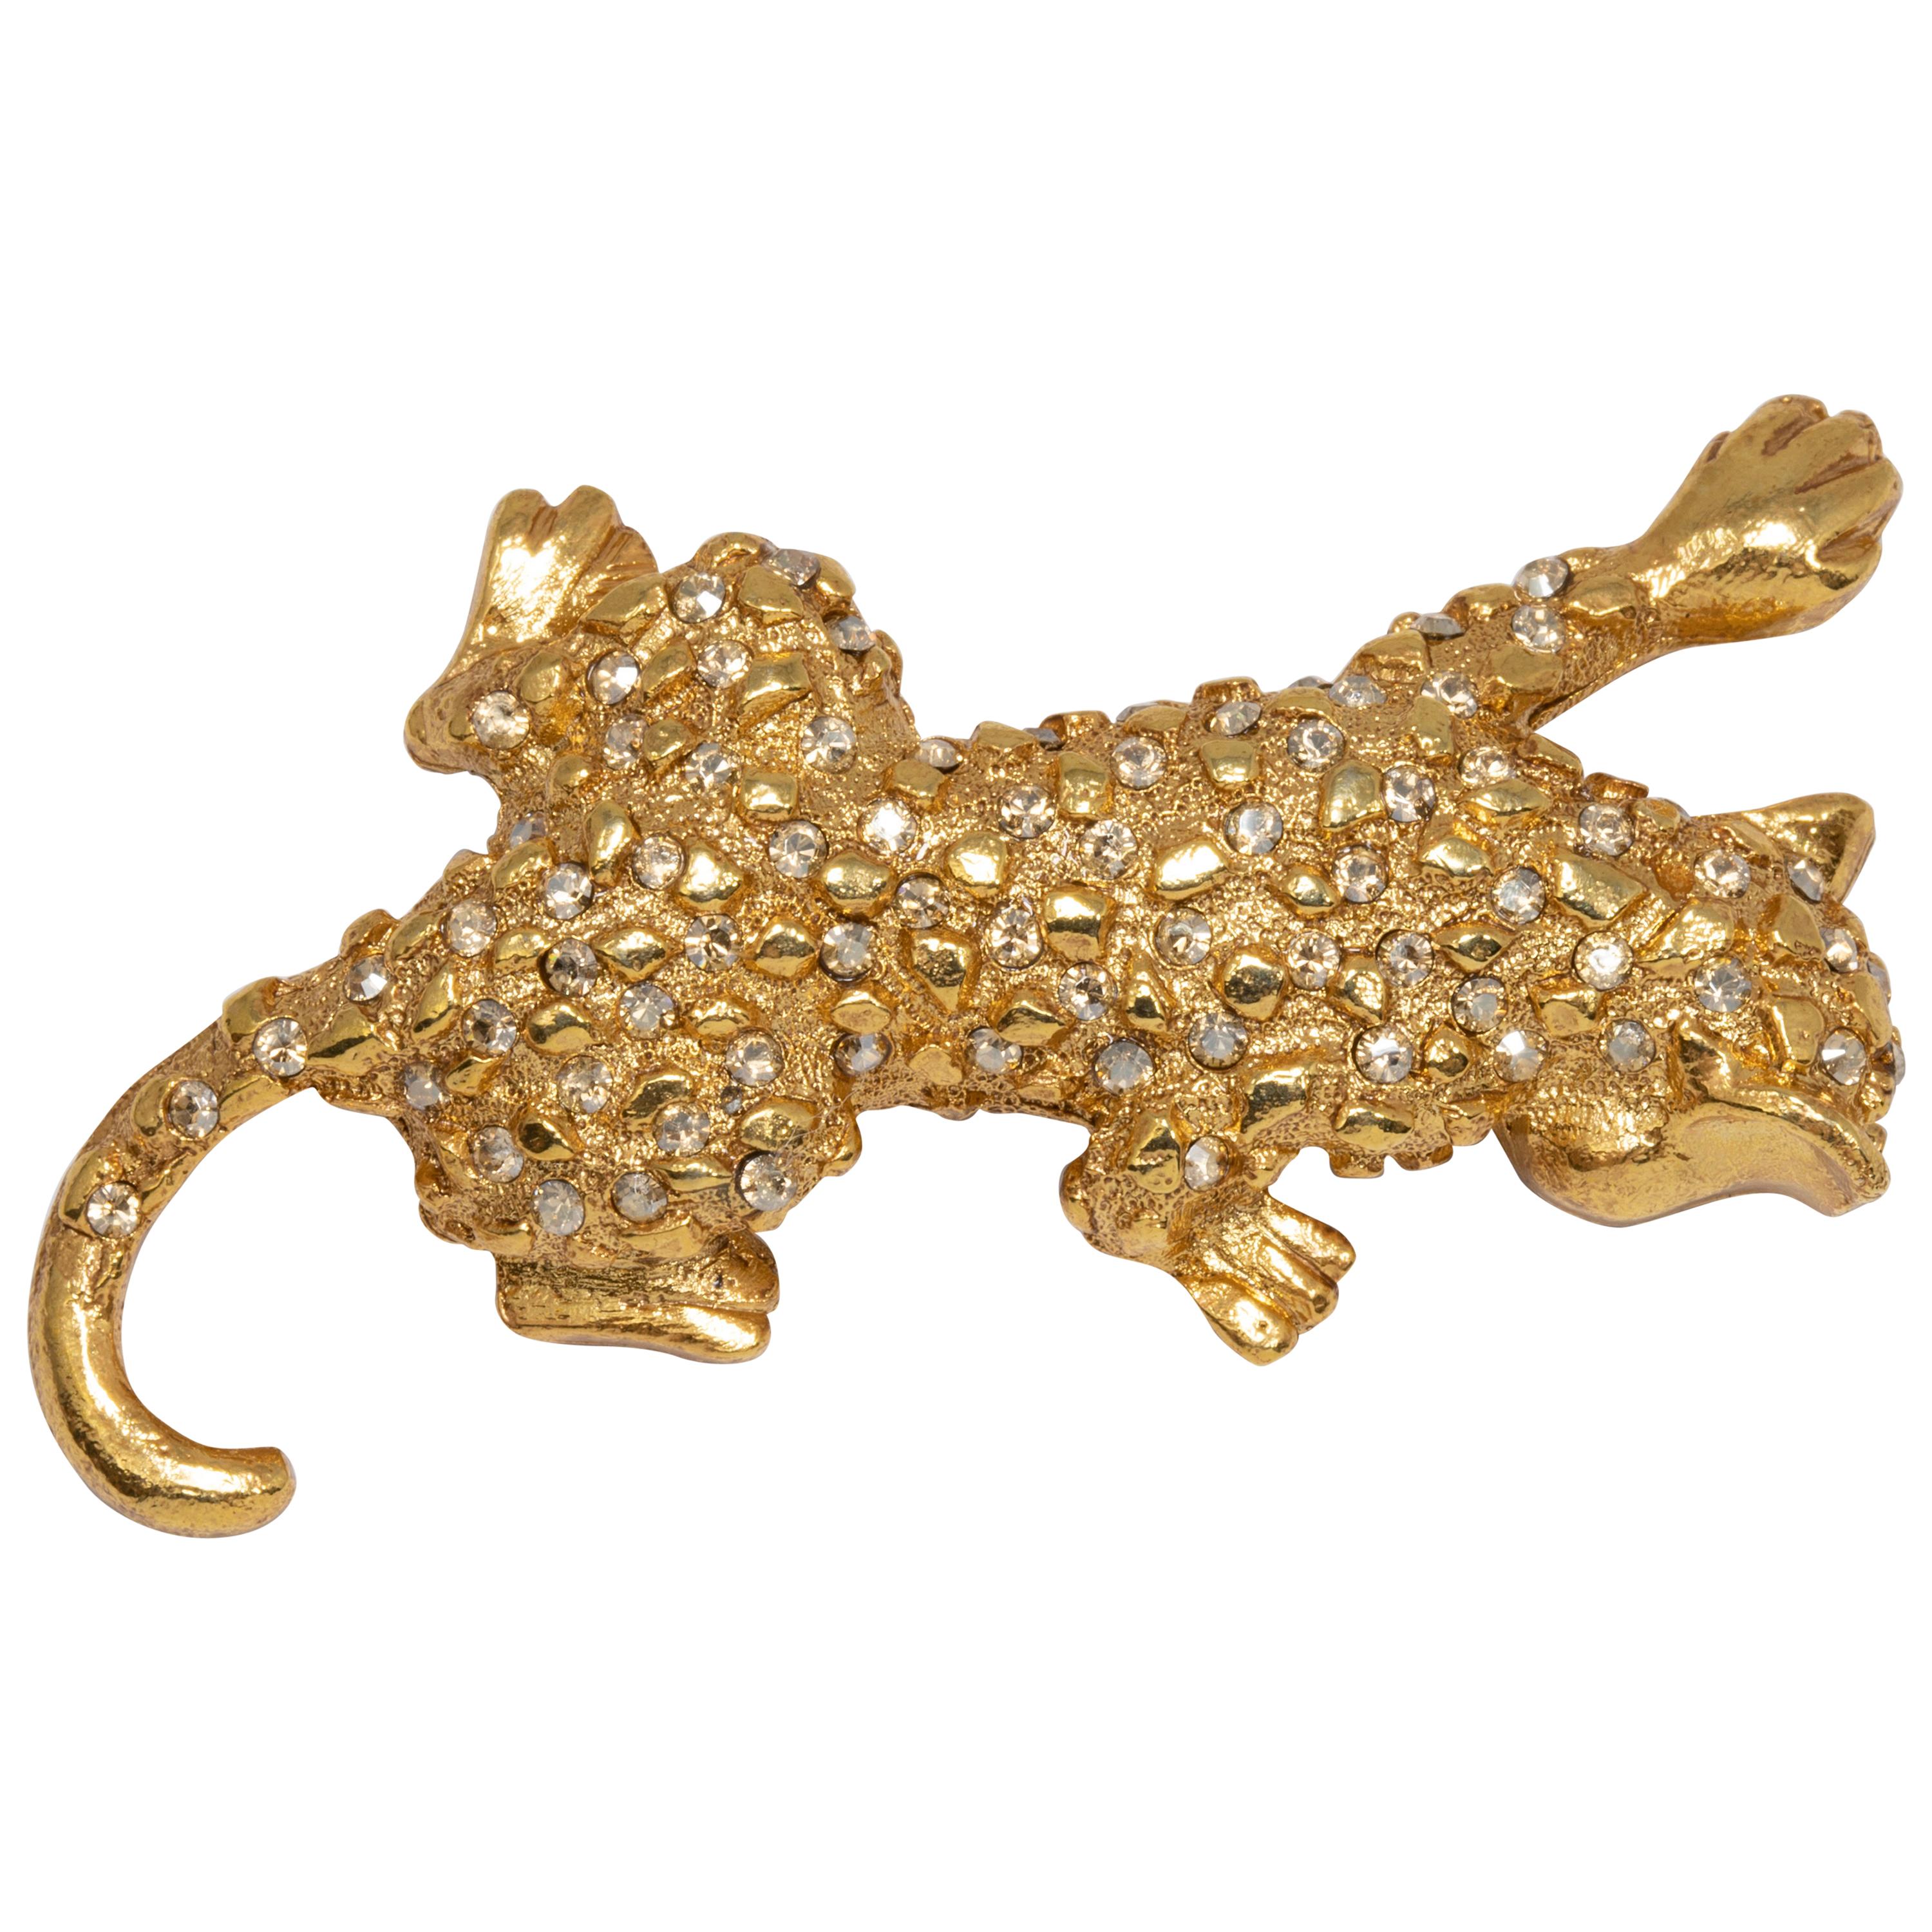 Leopard Pin Brooch Large Gold Tone with Chocolate Brown and Black Crystals 2.44" 